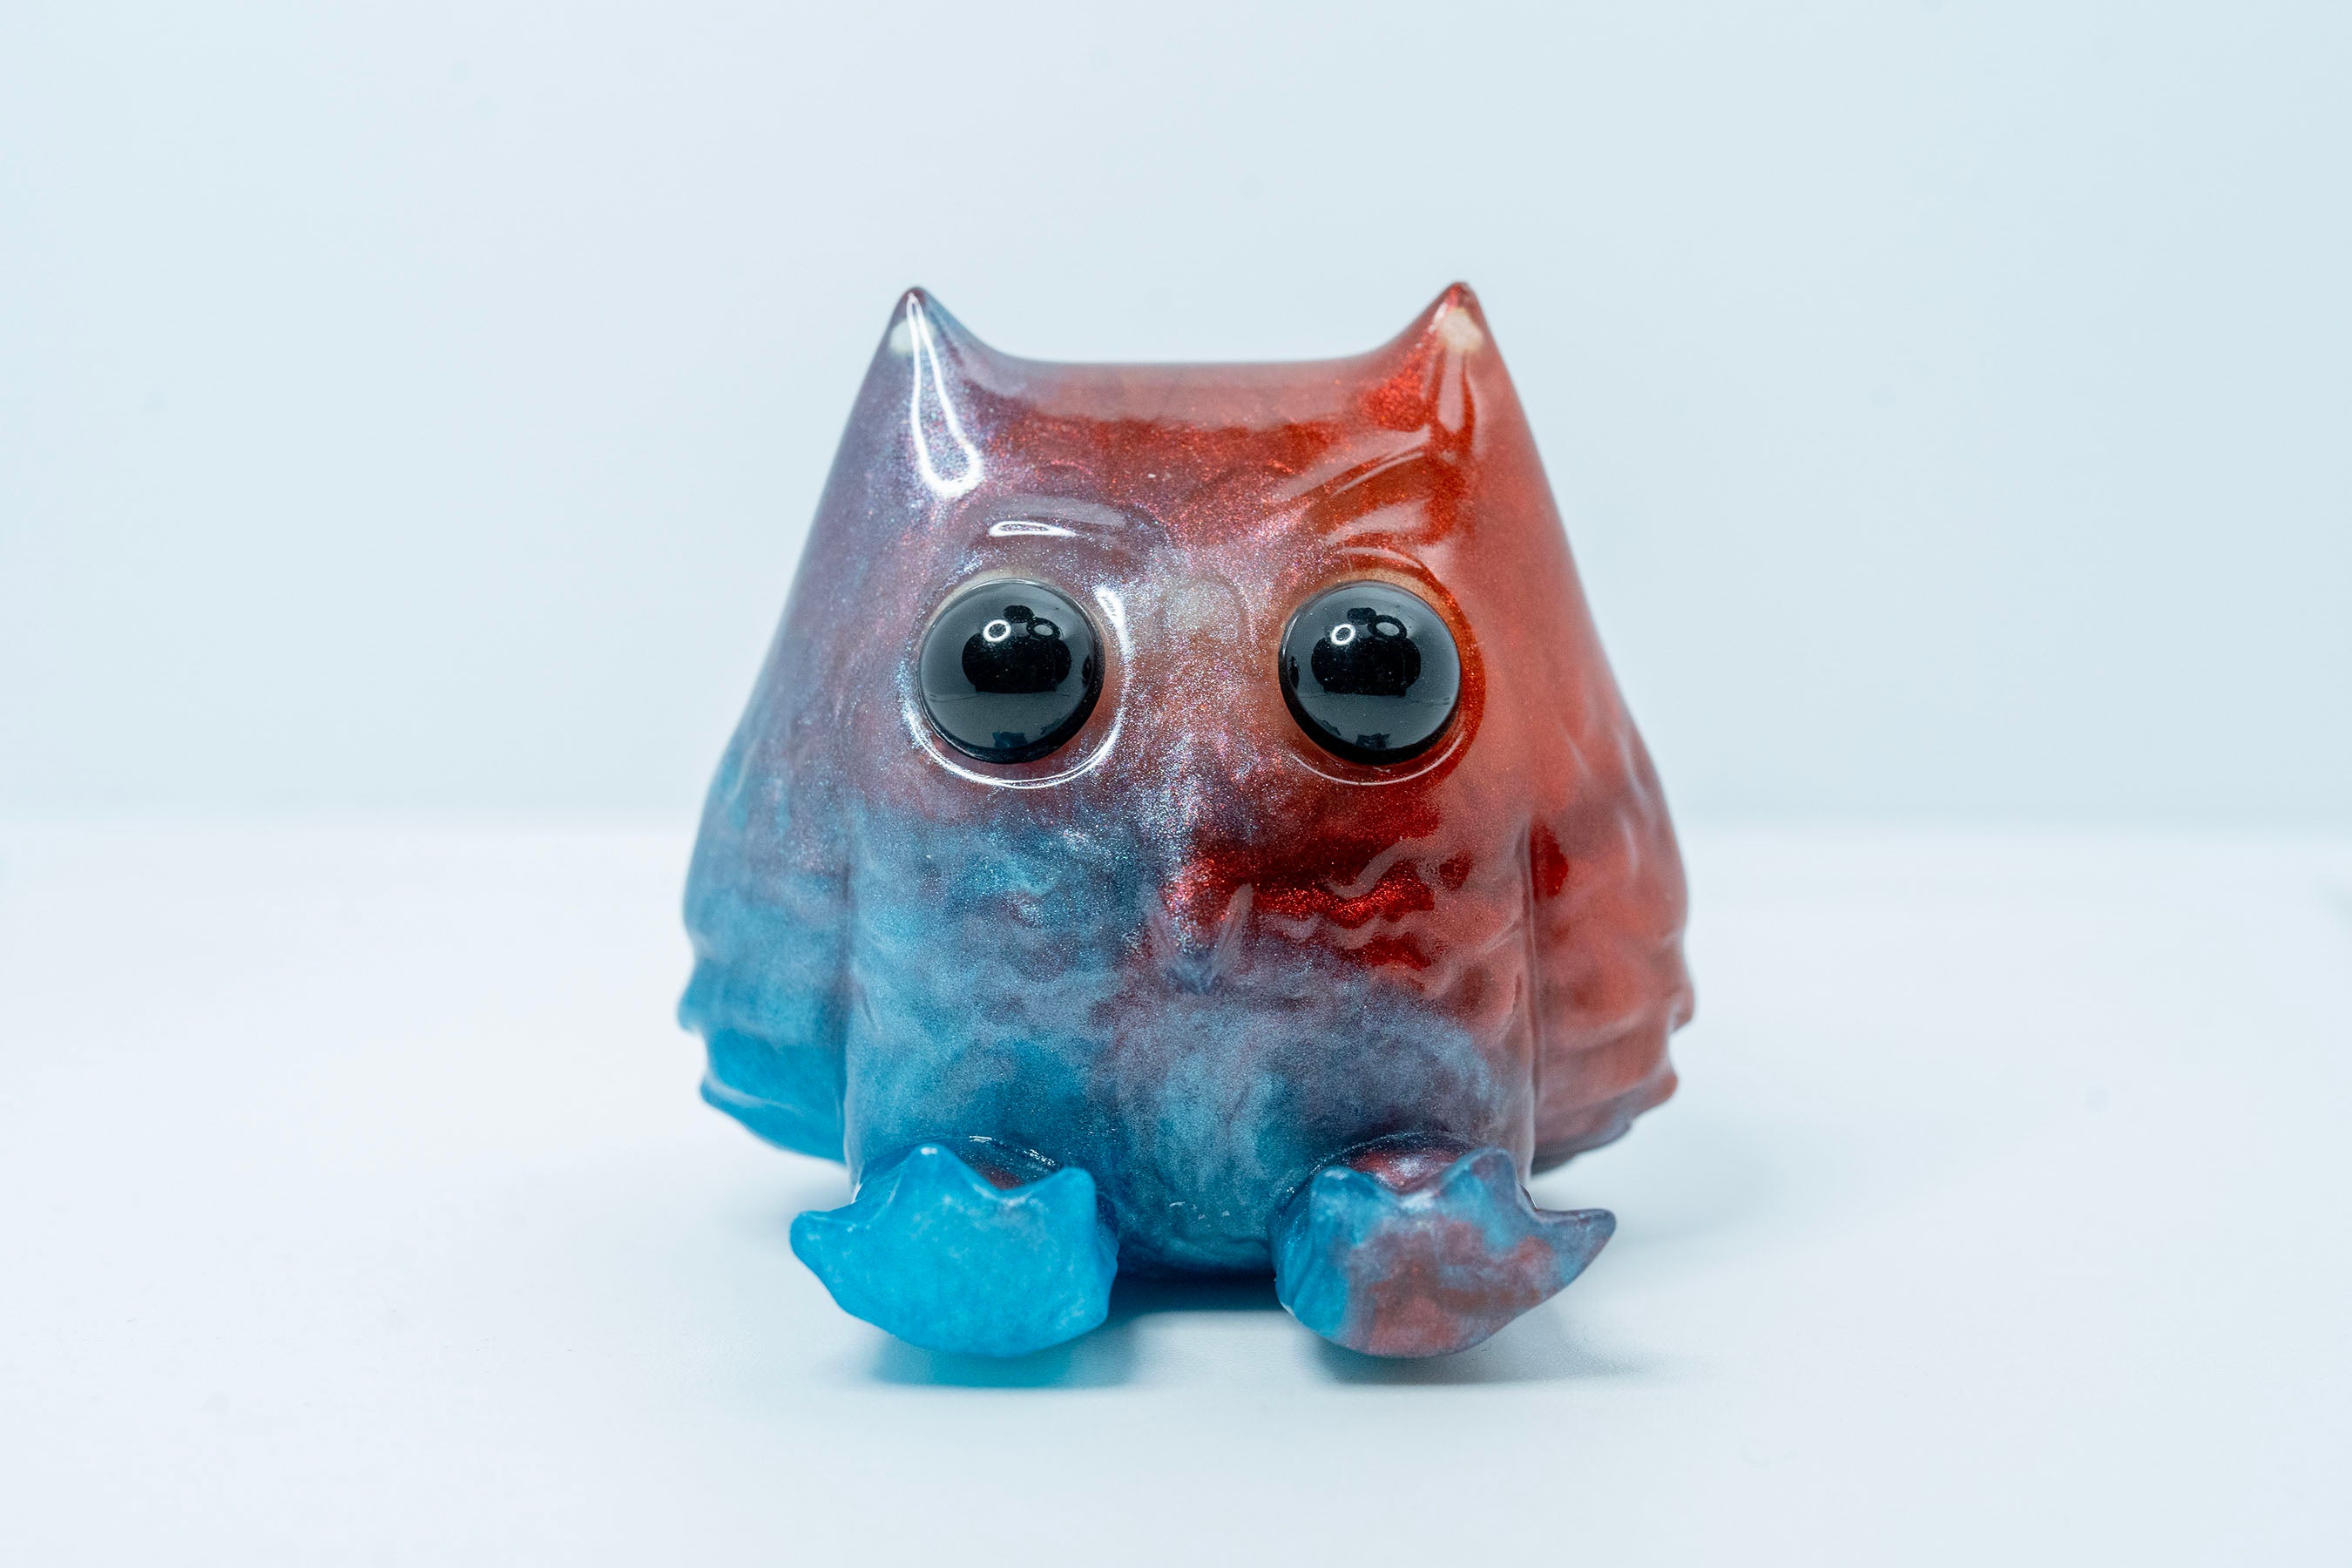 A resin toy owl, part of the Little Shit Big Deal - Sitzend Wyze collection by House of Wyze. Limited edition of 5 pieces, ships randomly. Gallery items ship 28 days after show opening.